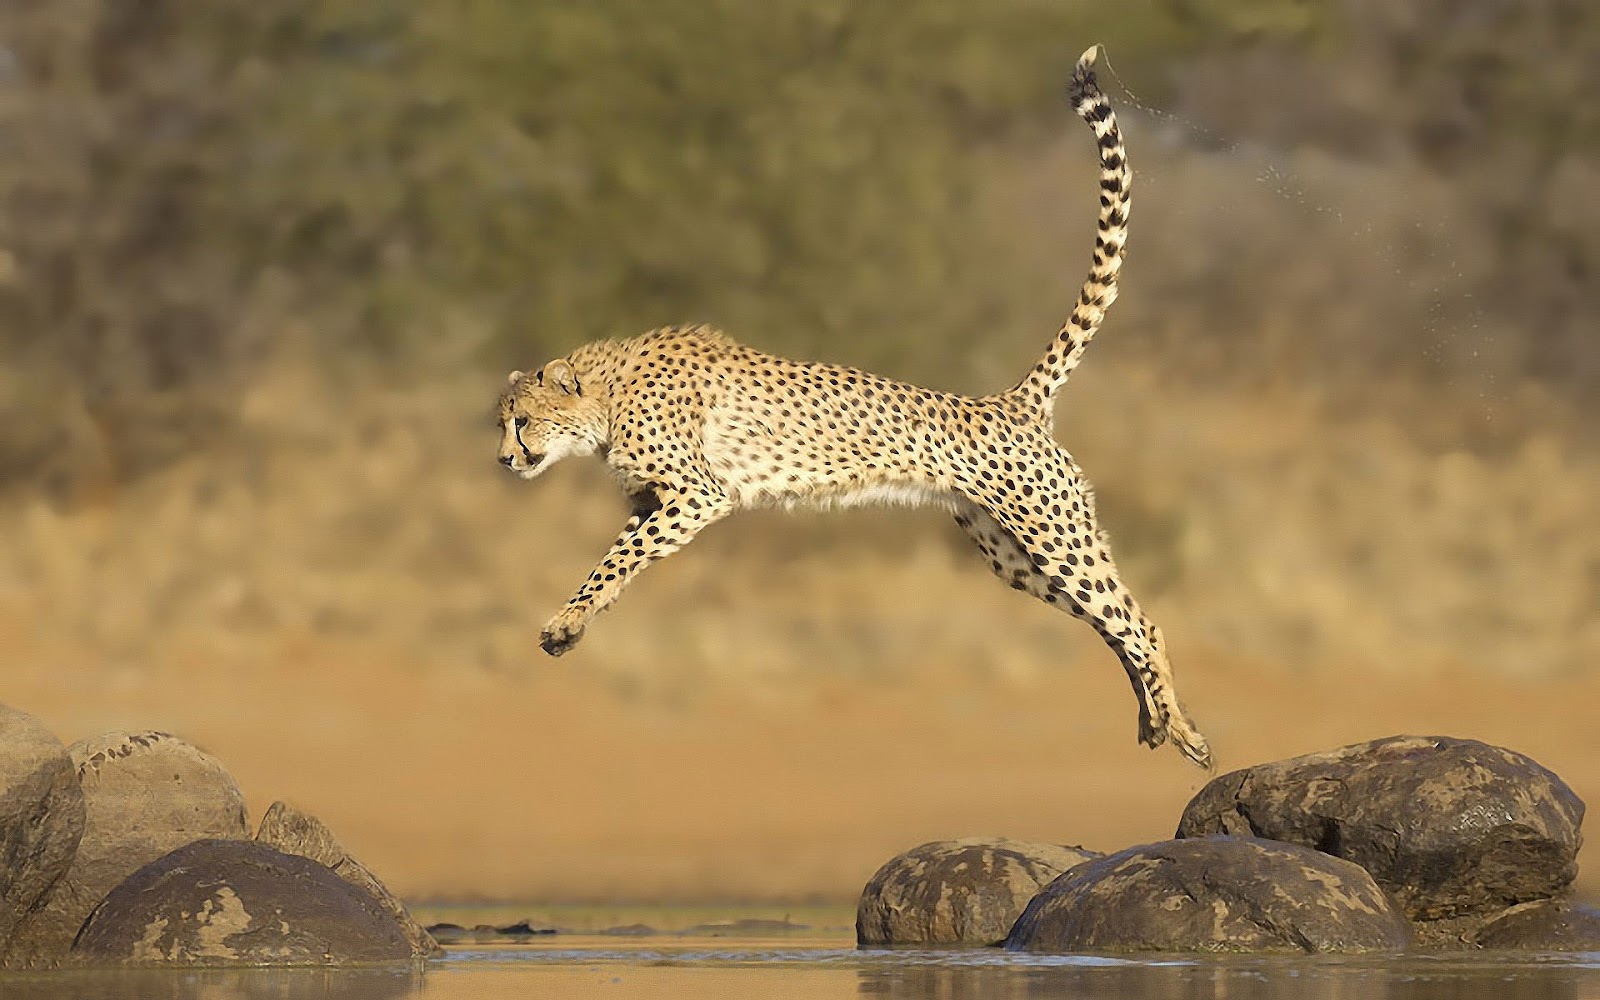 HD Cheetah Wallpaper With A Fast Running Jumping Over Water